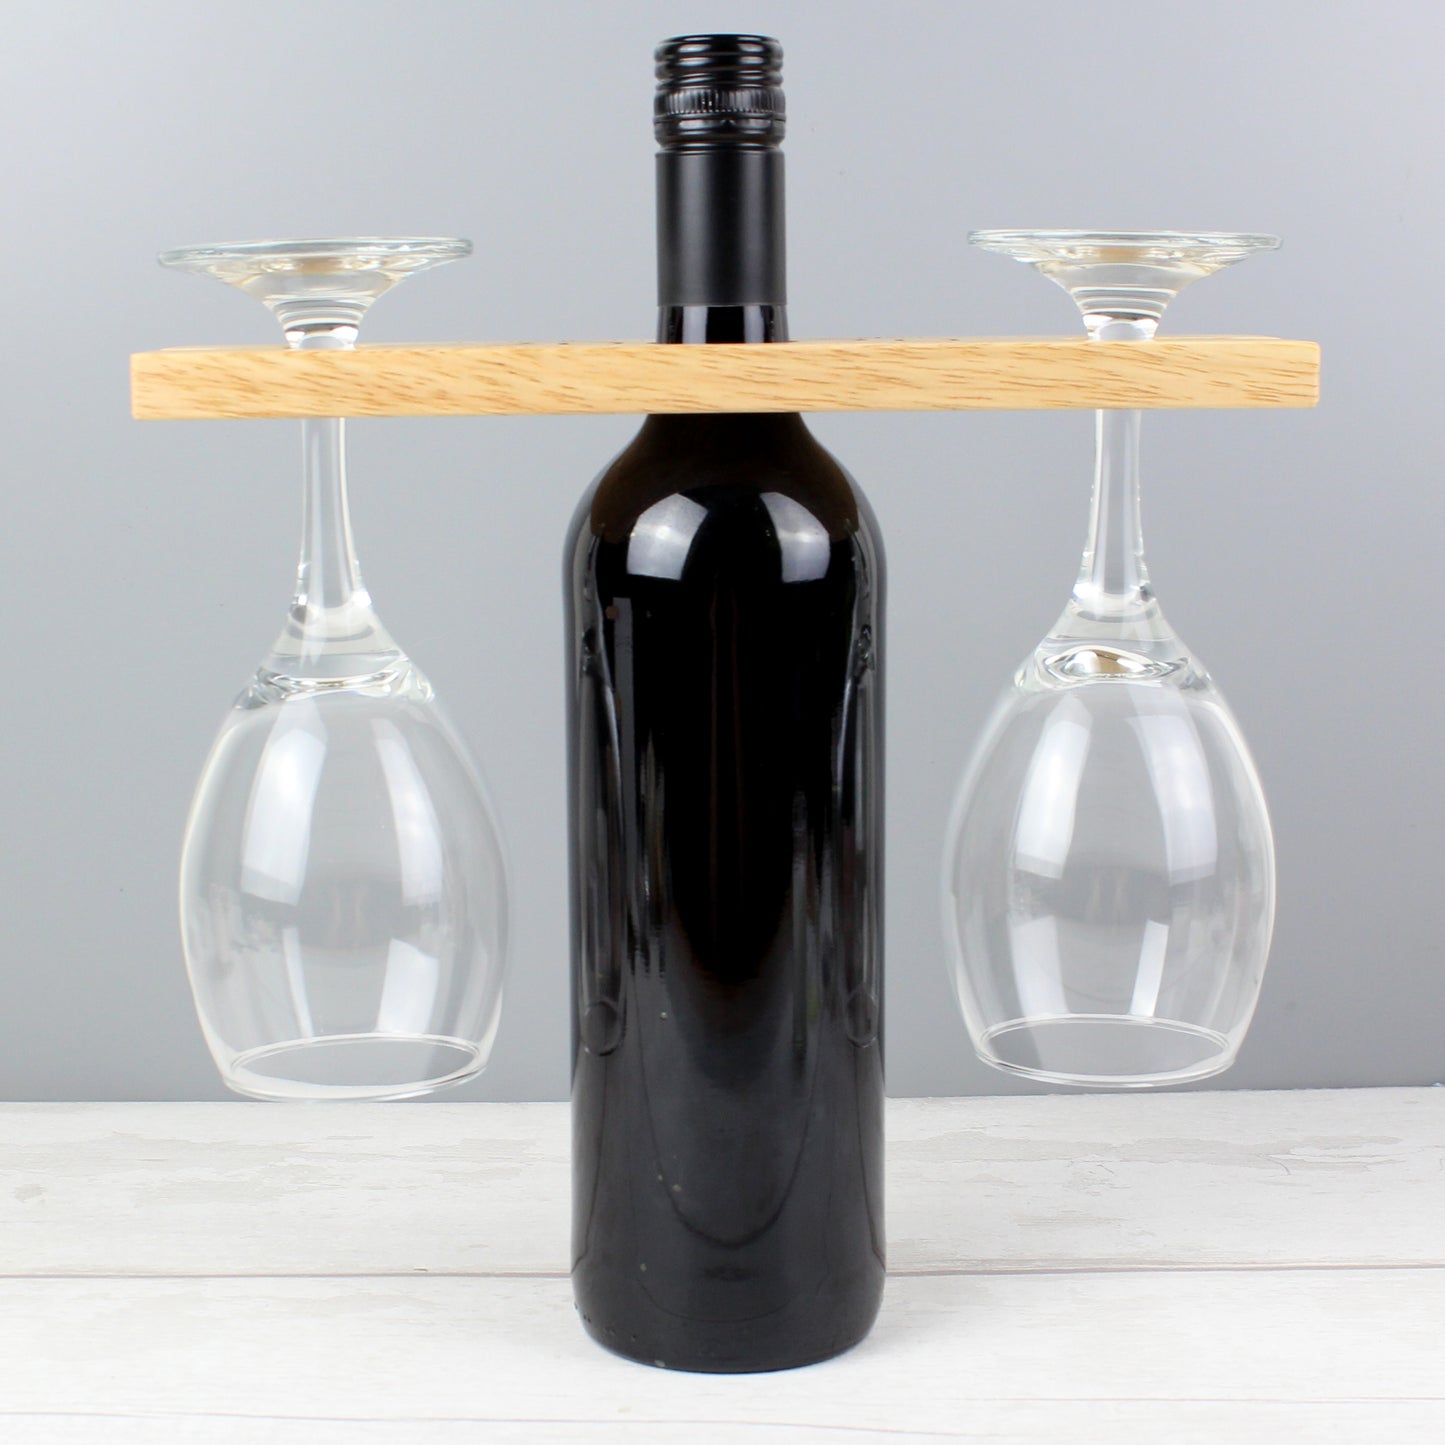 'Initials' wine glass and bottle butler - Lilybet loves